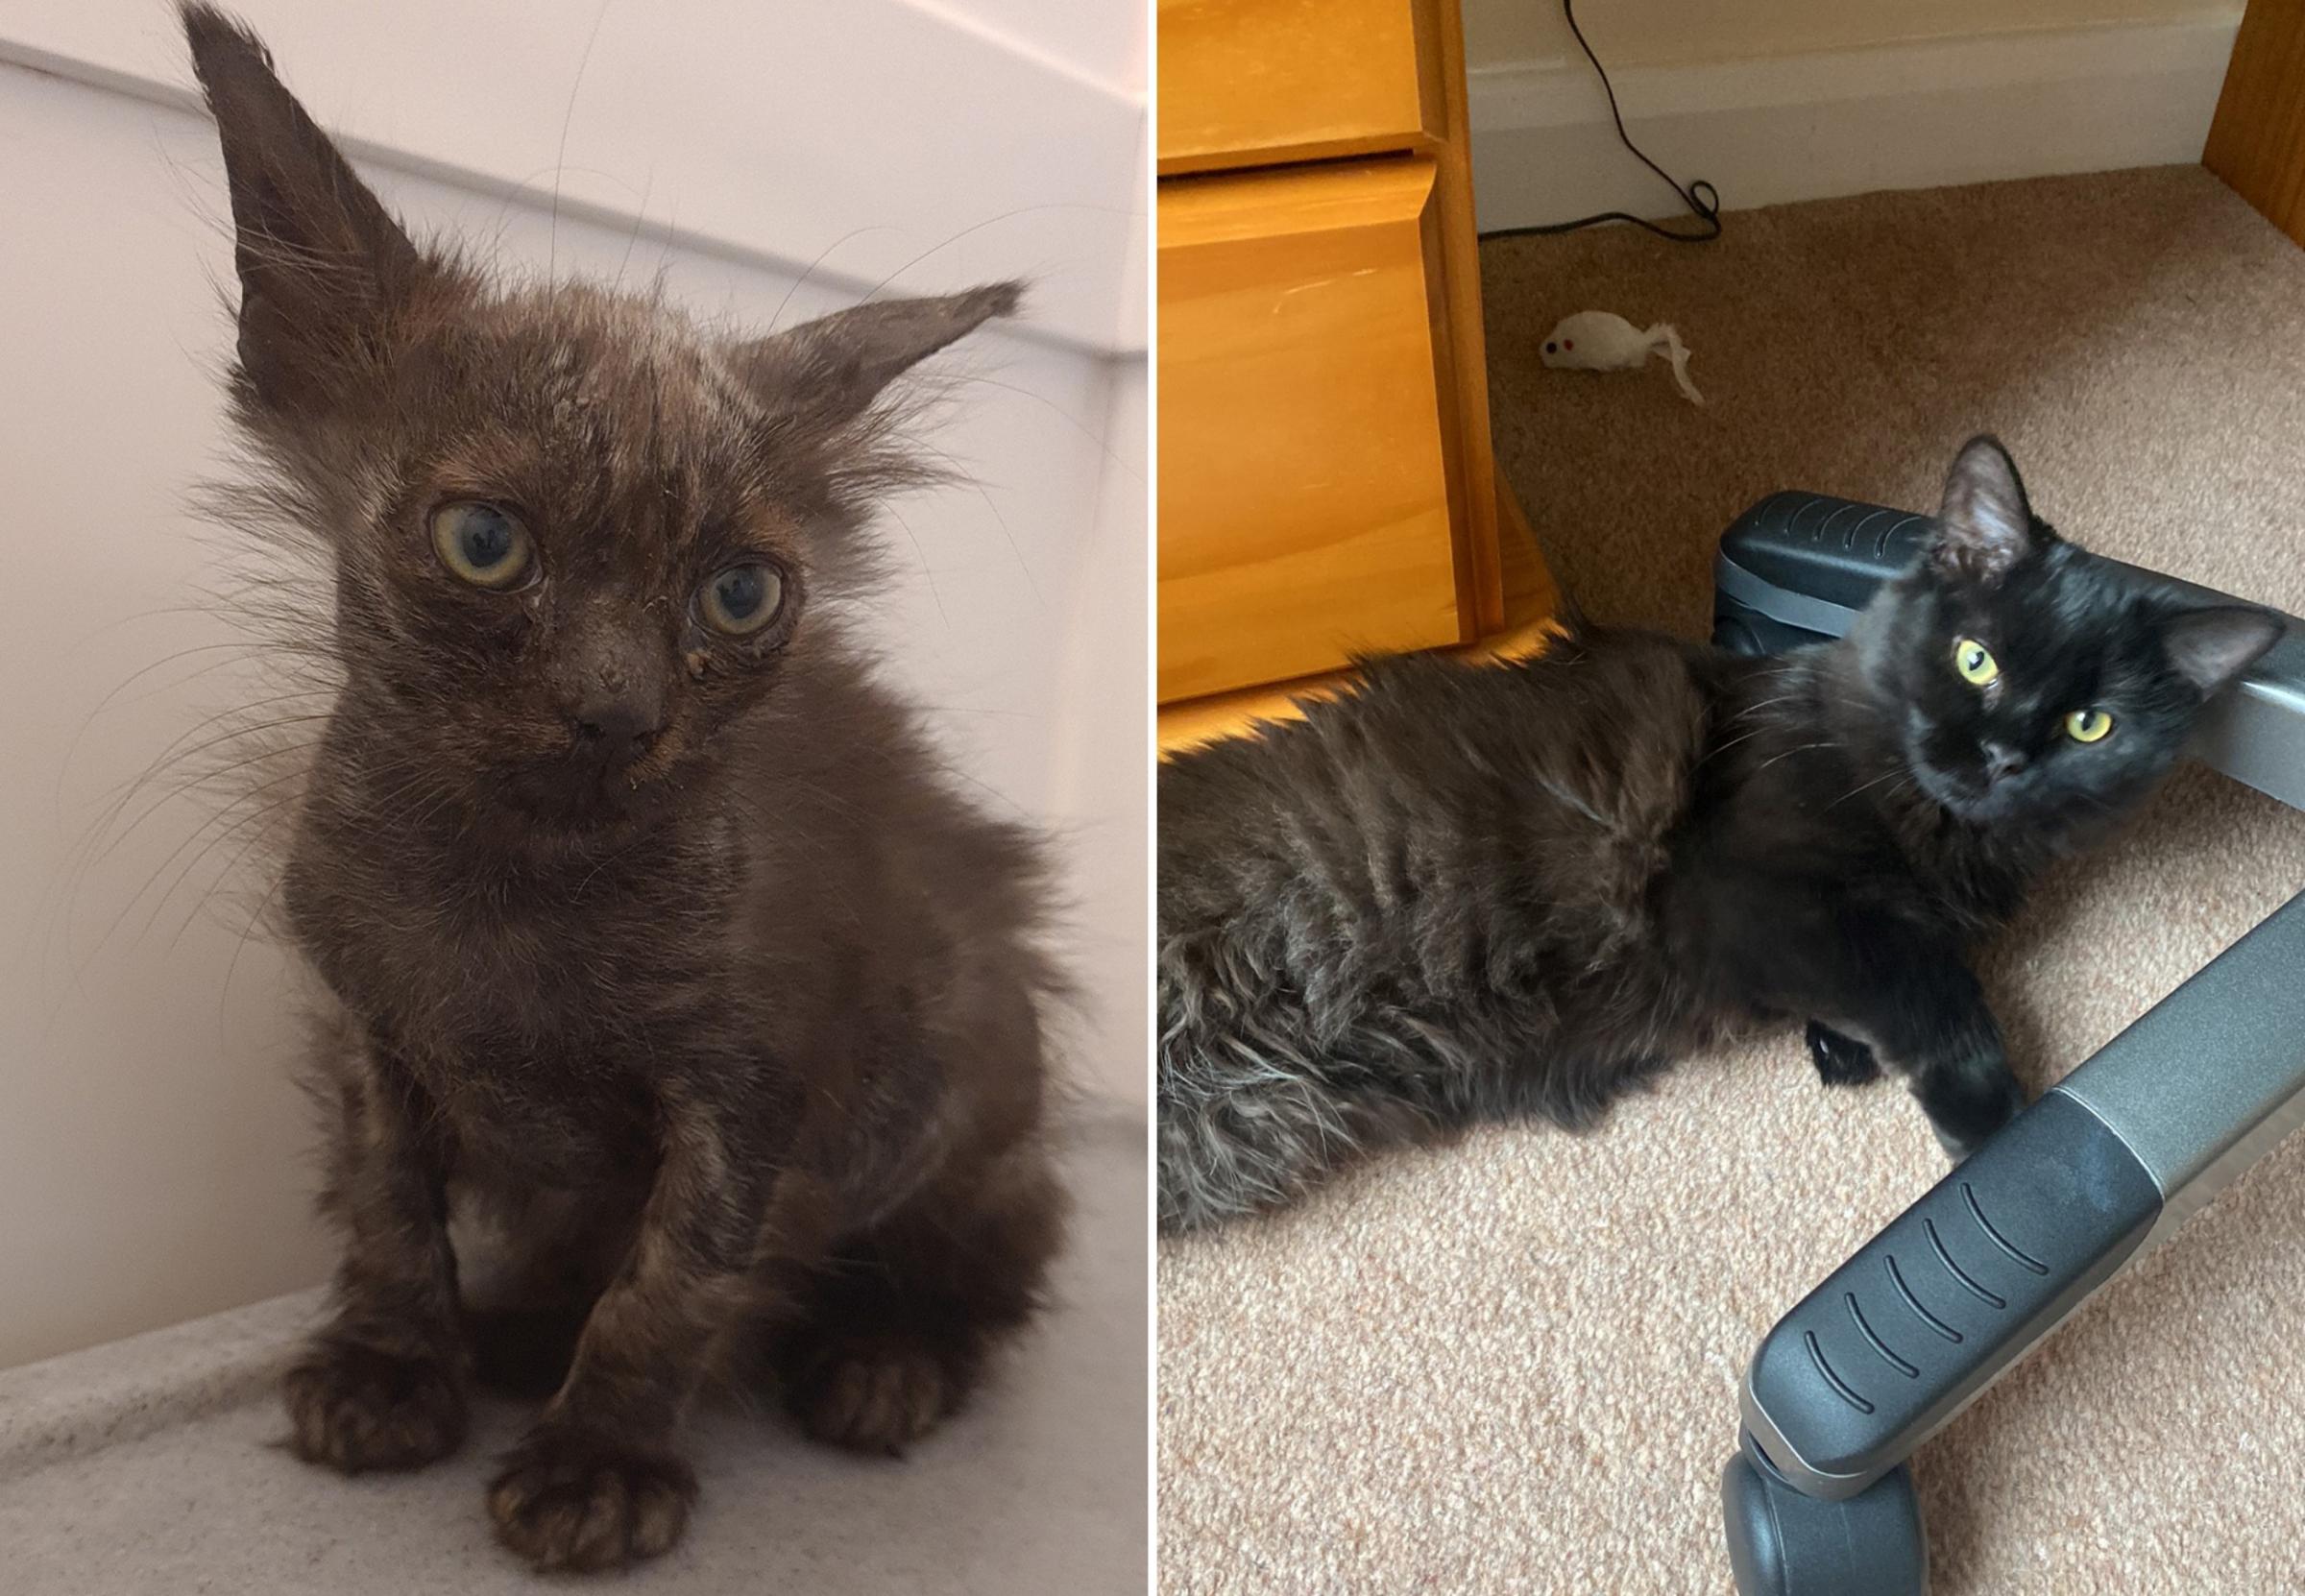 Before and after - Tansy when she arrived in care and now in her new home.